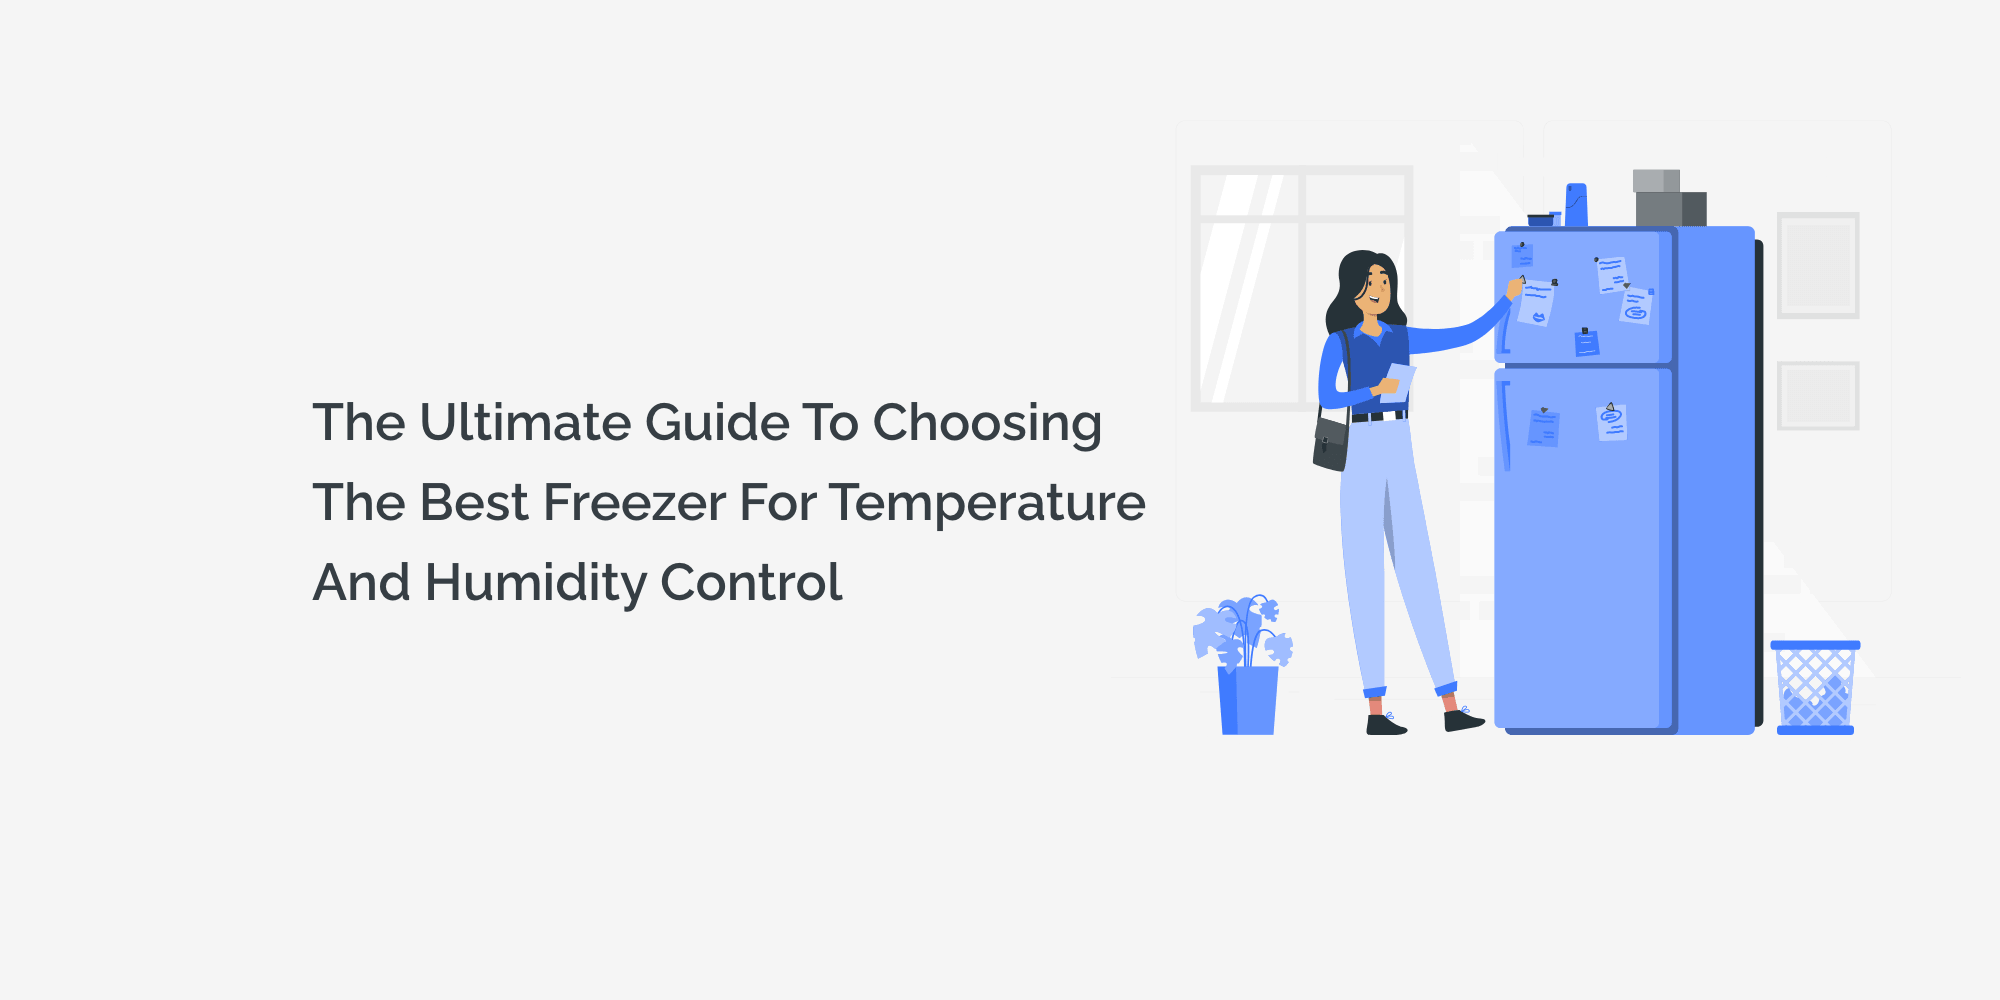 The Ultimate Guide to Choosing the Best Freezer for Temperature and Humidity Control